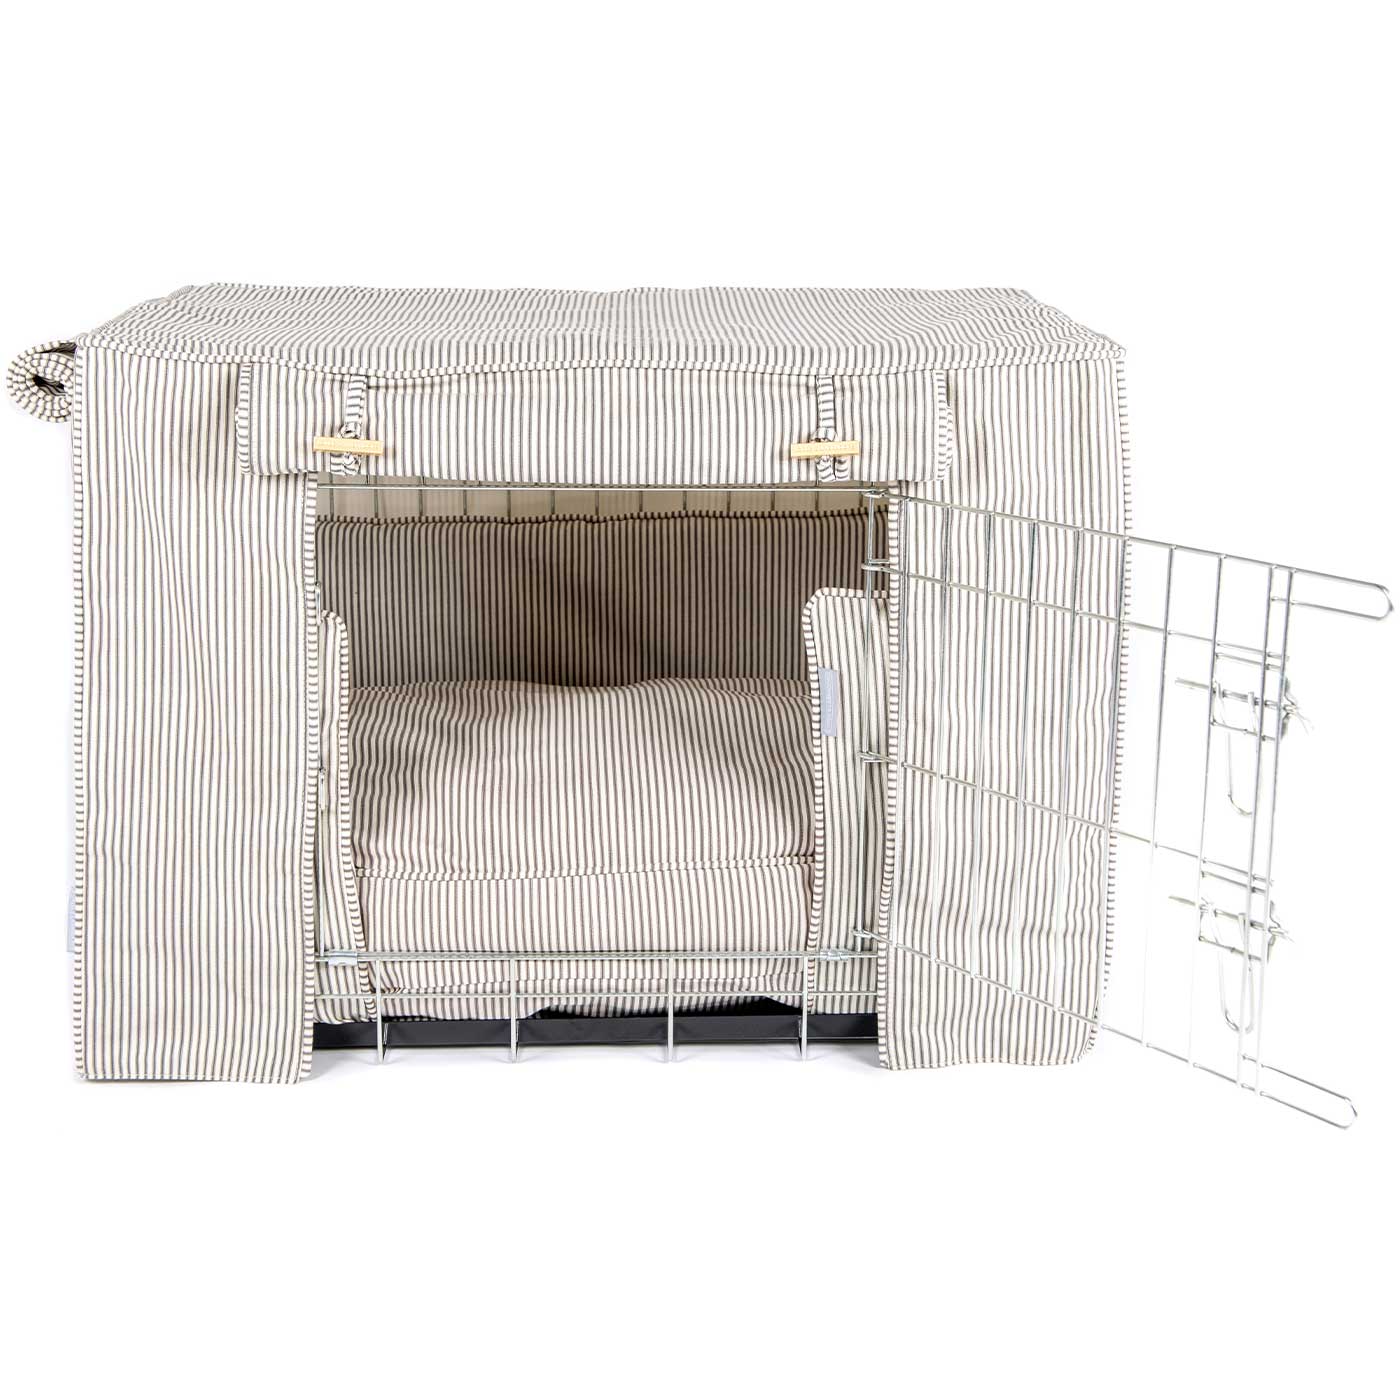 Luxury Silver Dog Cage Set With Cushion, Bumper and Cage Cover, in Regency Stripe. The Perfect Dog Cage For The Ultimate Naptime, Available Now at Lords & Labradors US